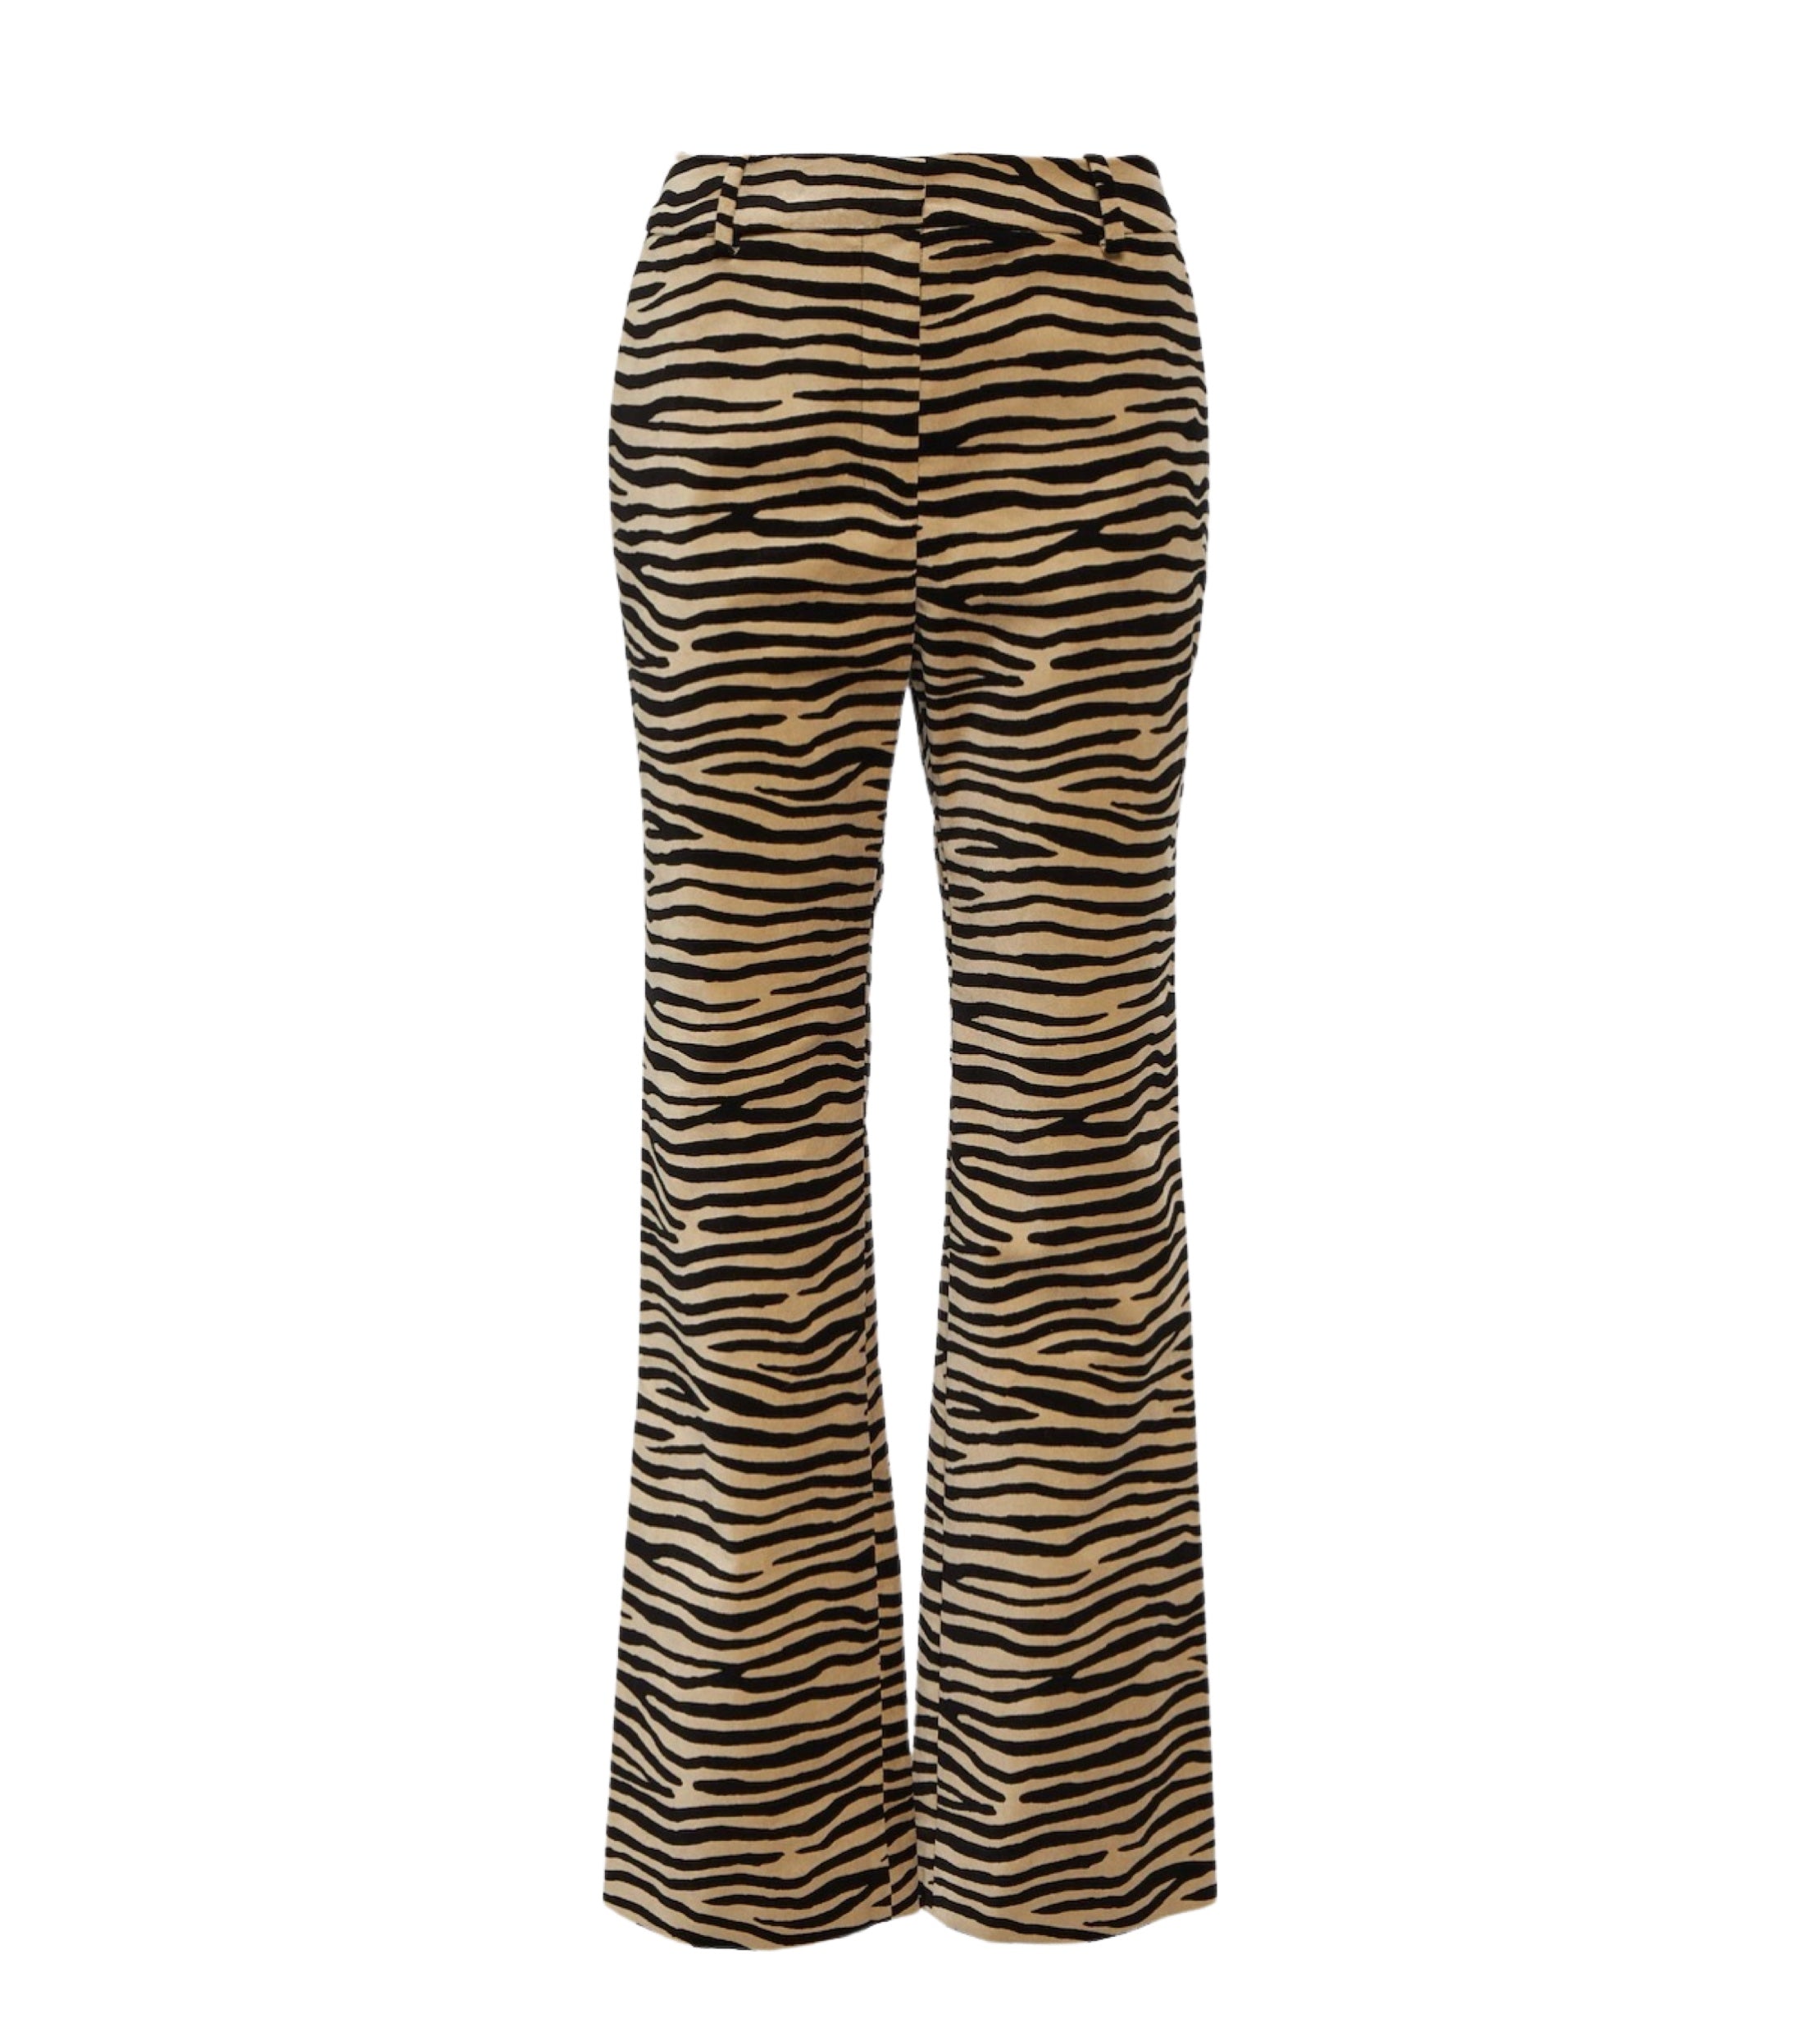 Tiger-print CottonTtwill Flared Pants